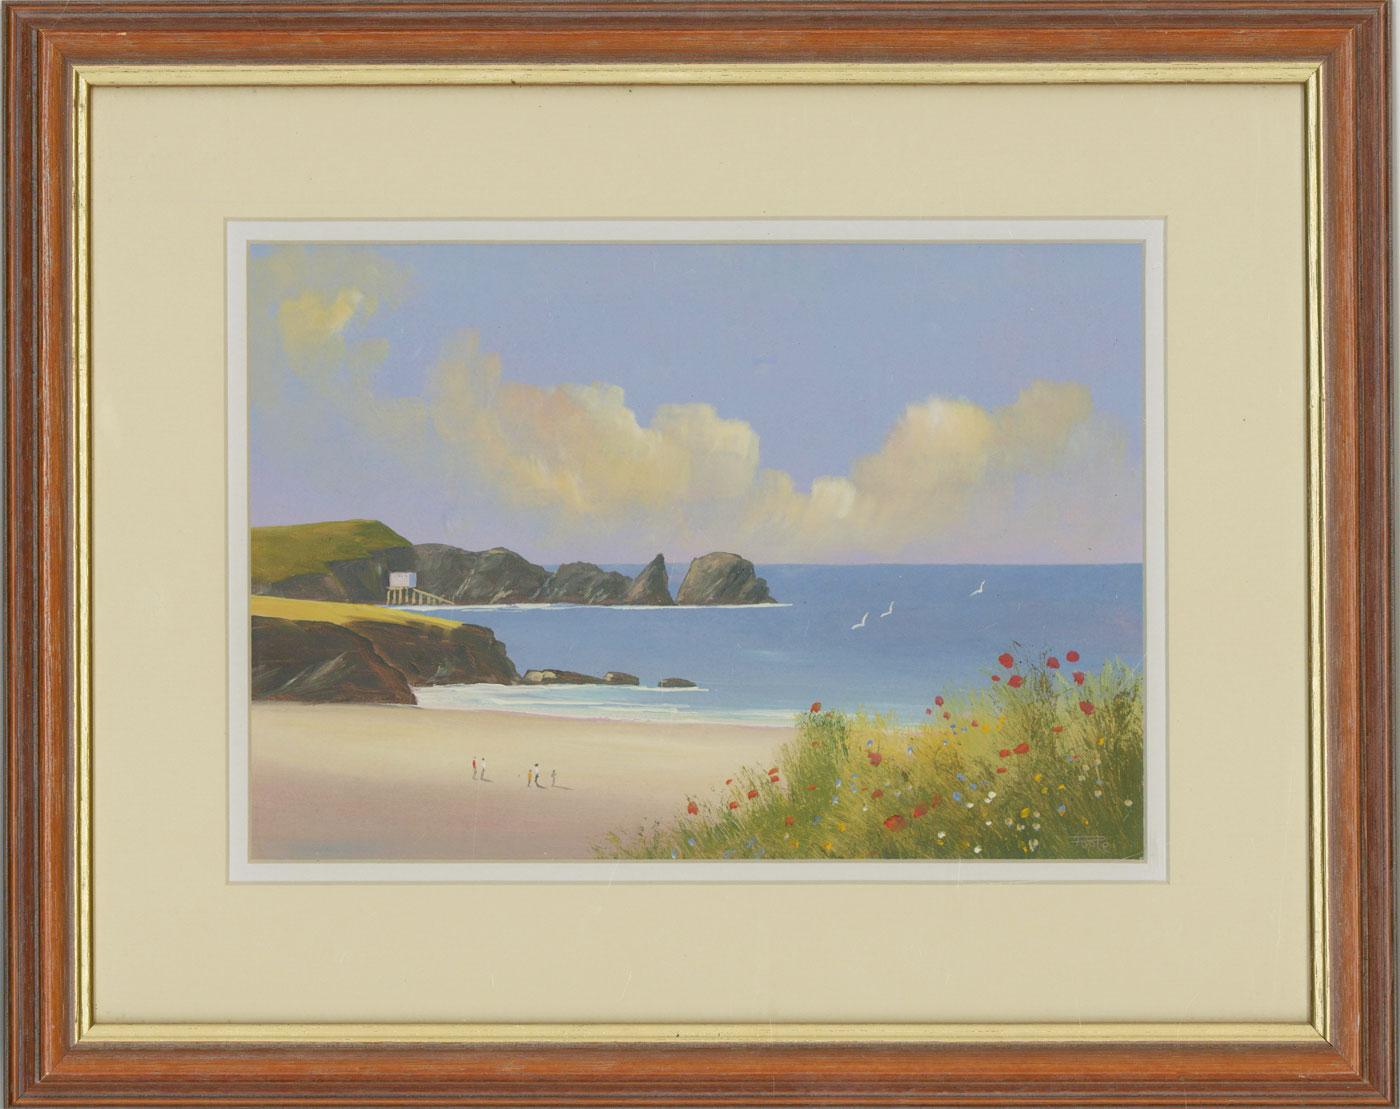 A highly decorative seascape view of Mother Ivey's Bay in Cornwall. The vibrant colour palette and panoramic composition is reminiscent of vintage postcards produced throughout the 1950s. This vintage feel is typical of Poole's nostalgic style and